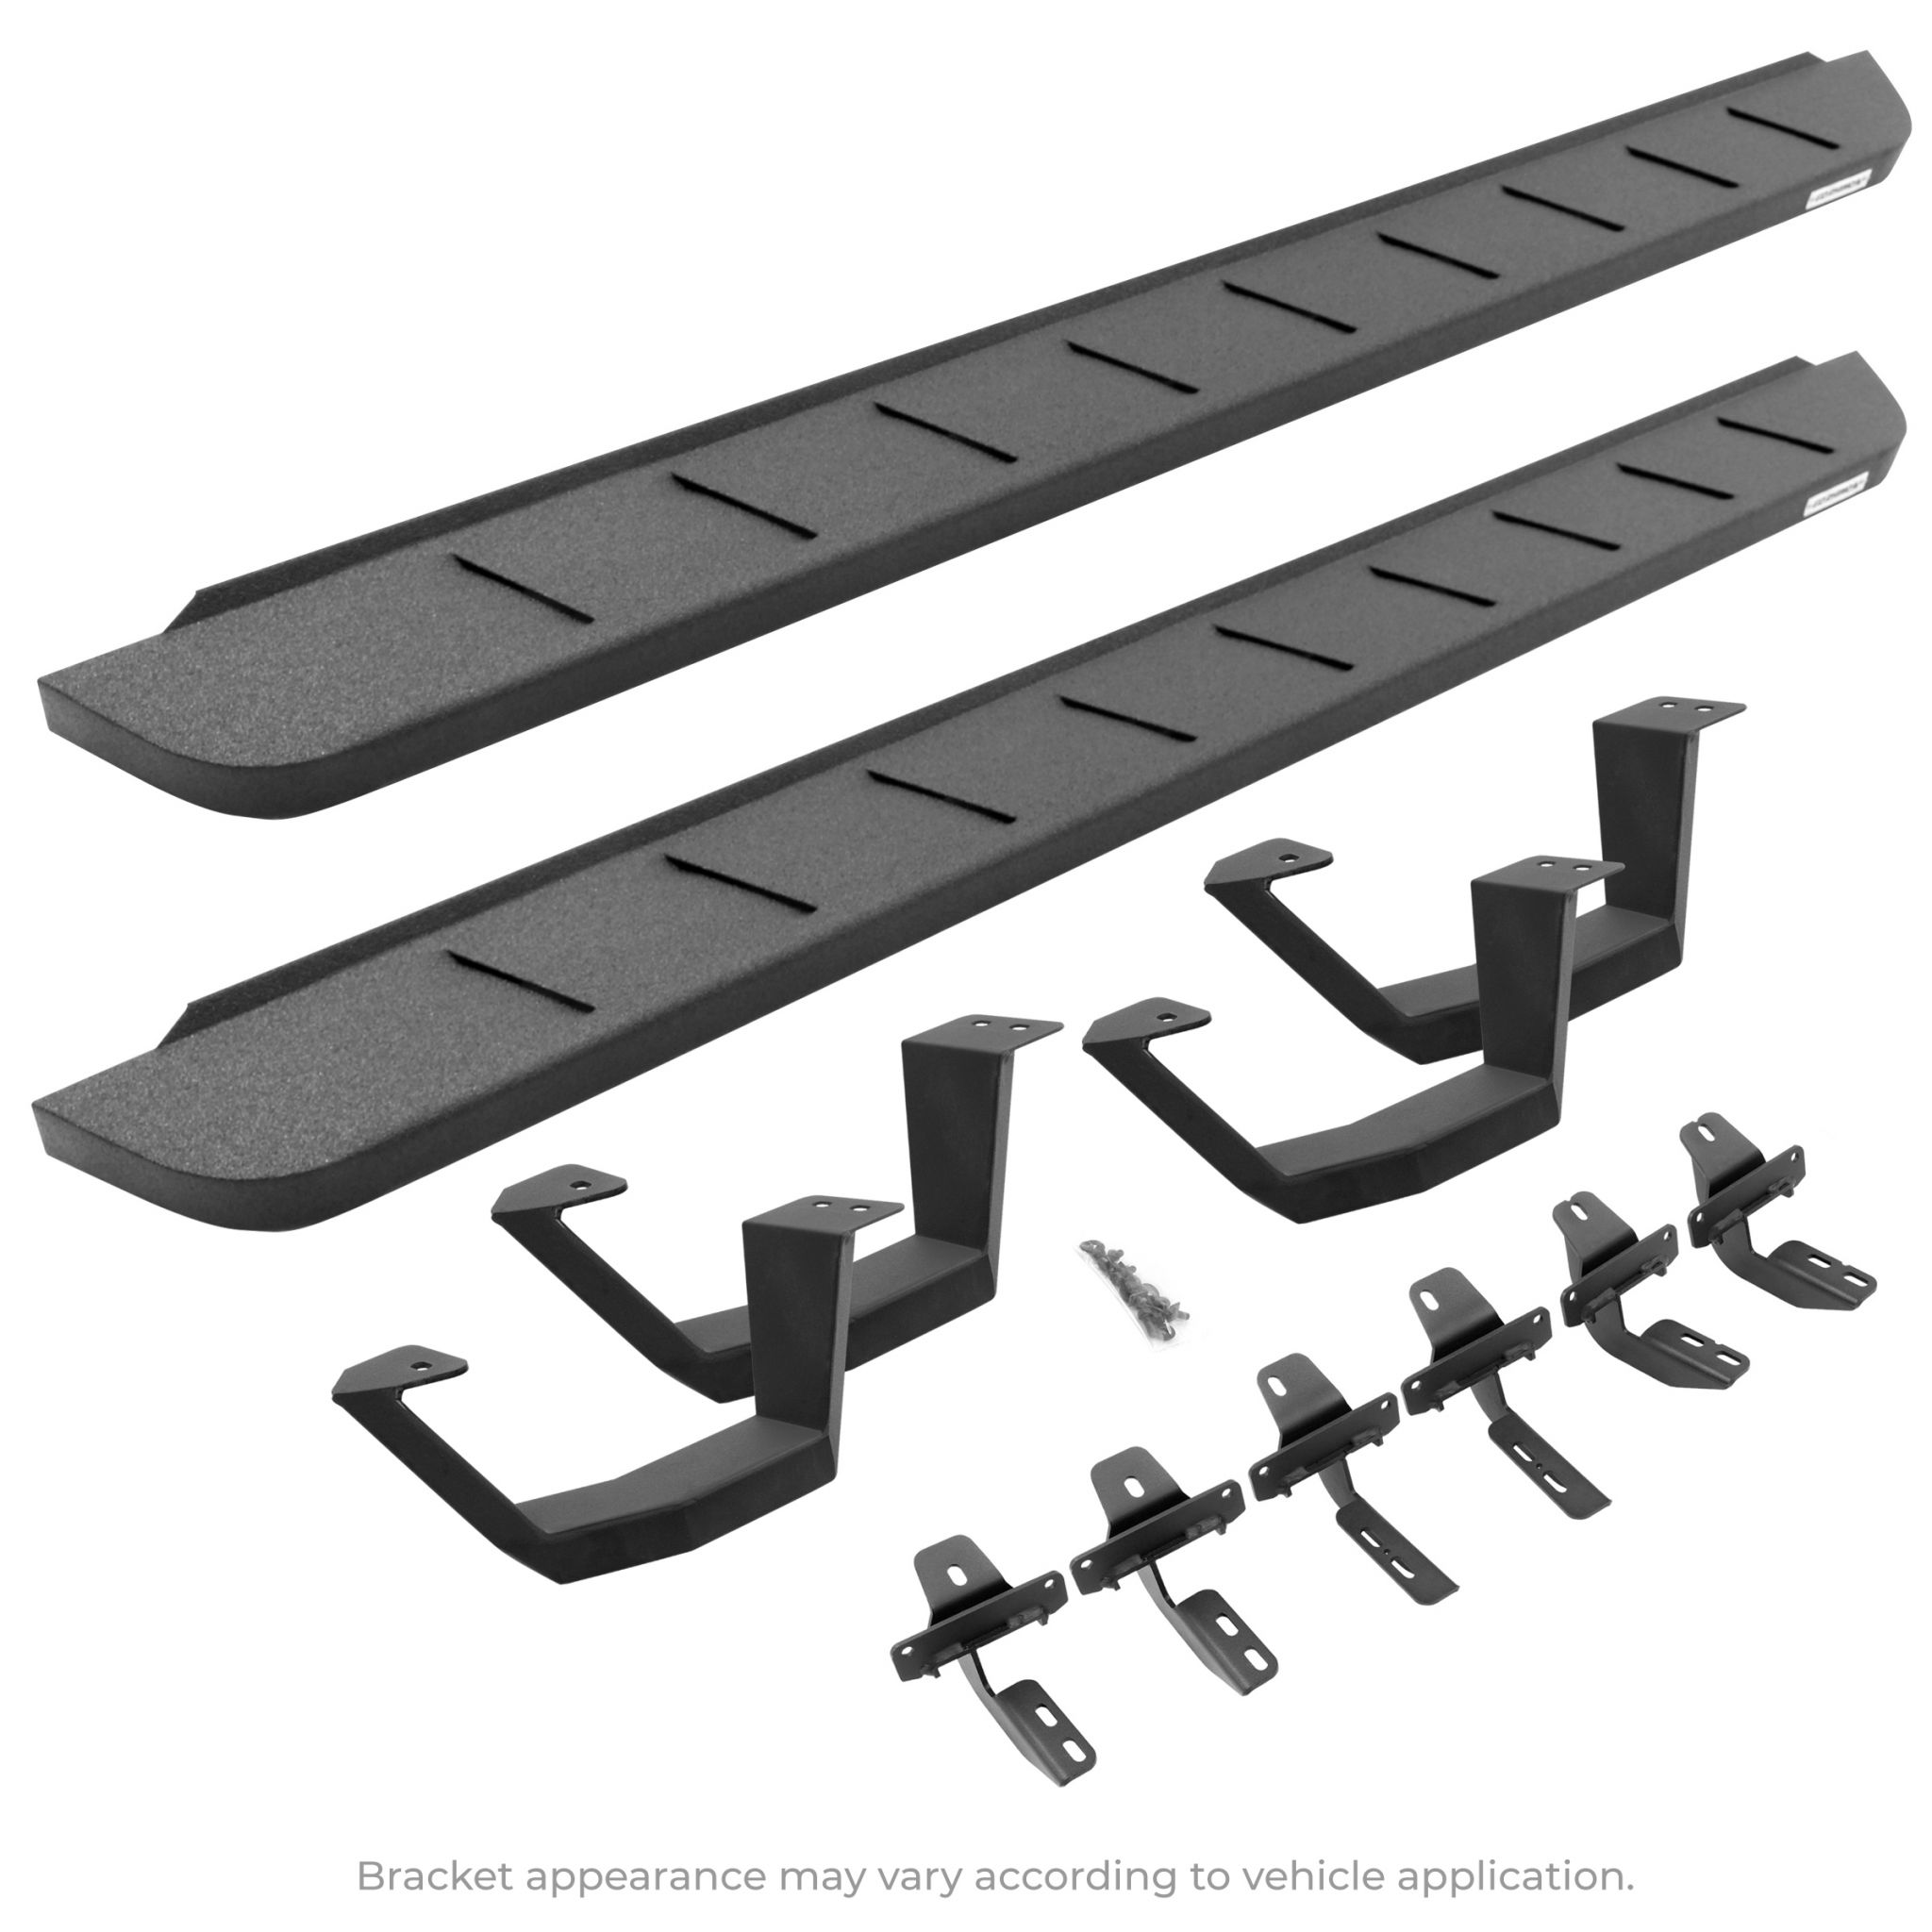 Go Rhino - 6340428020T - RB10 Running Boards With Mounting Brackets & 2 Pairs of Drop Steps Kit - Protective Bedliner Coating